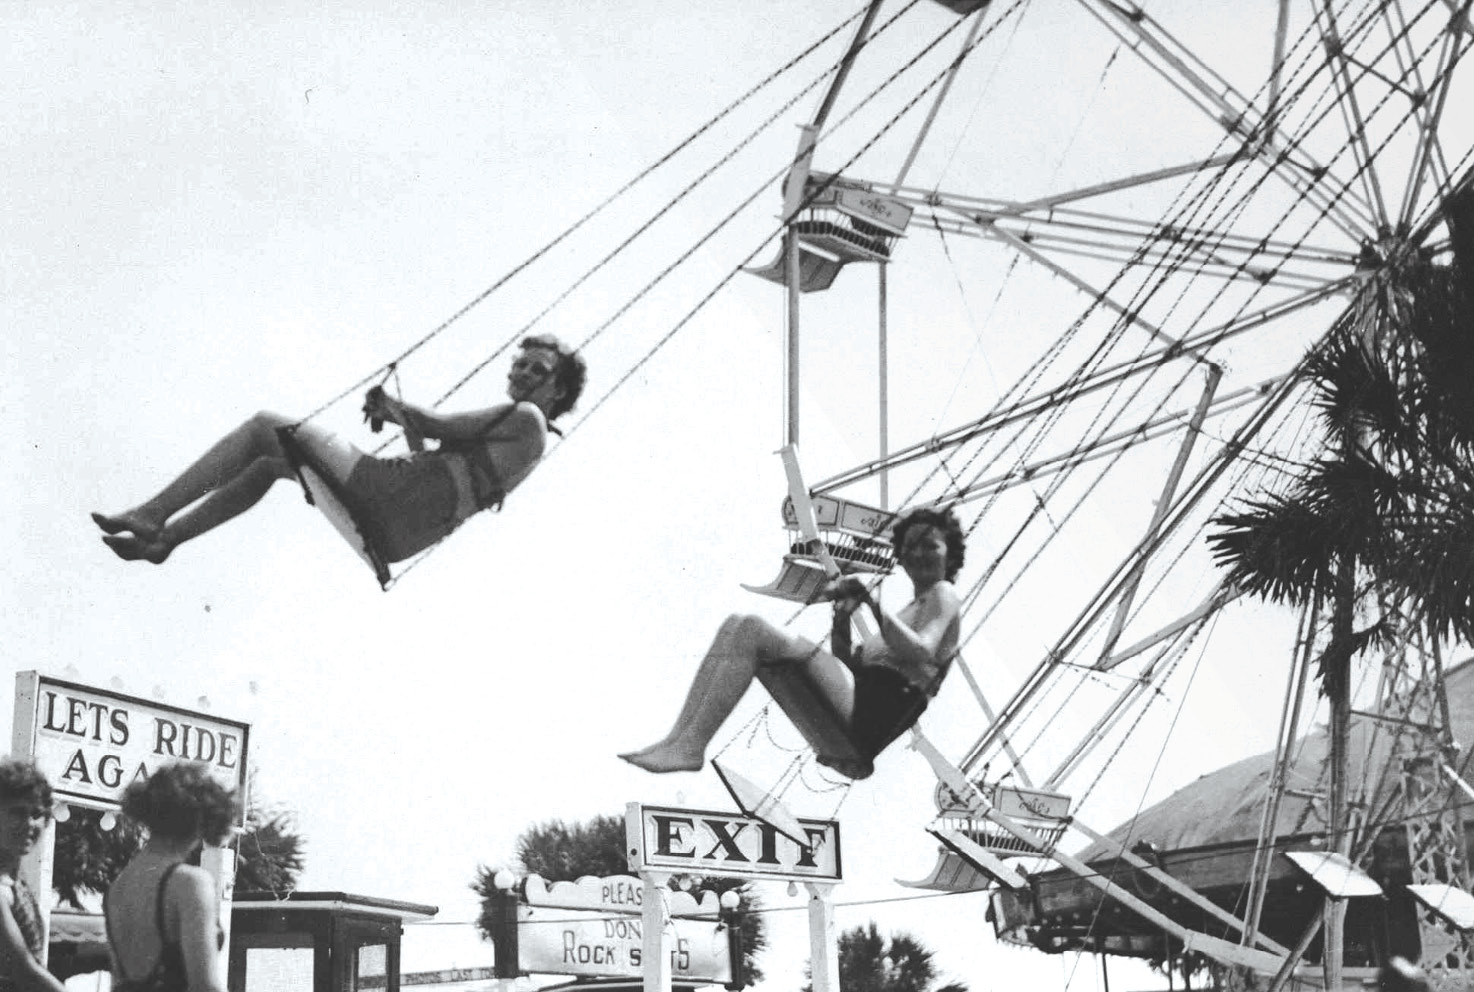 The swing ride at the amusement park in the 1960s